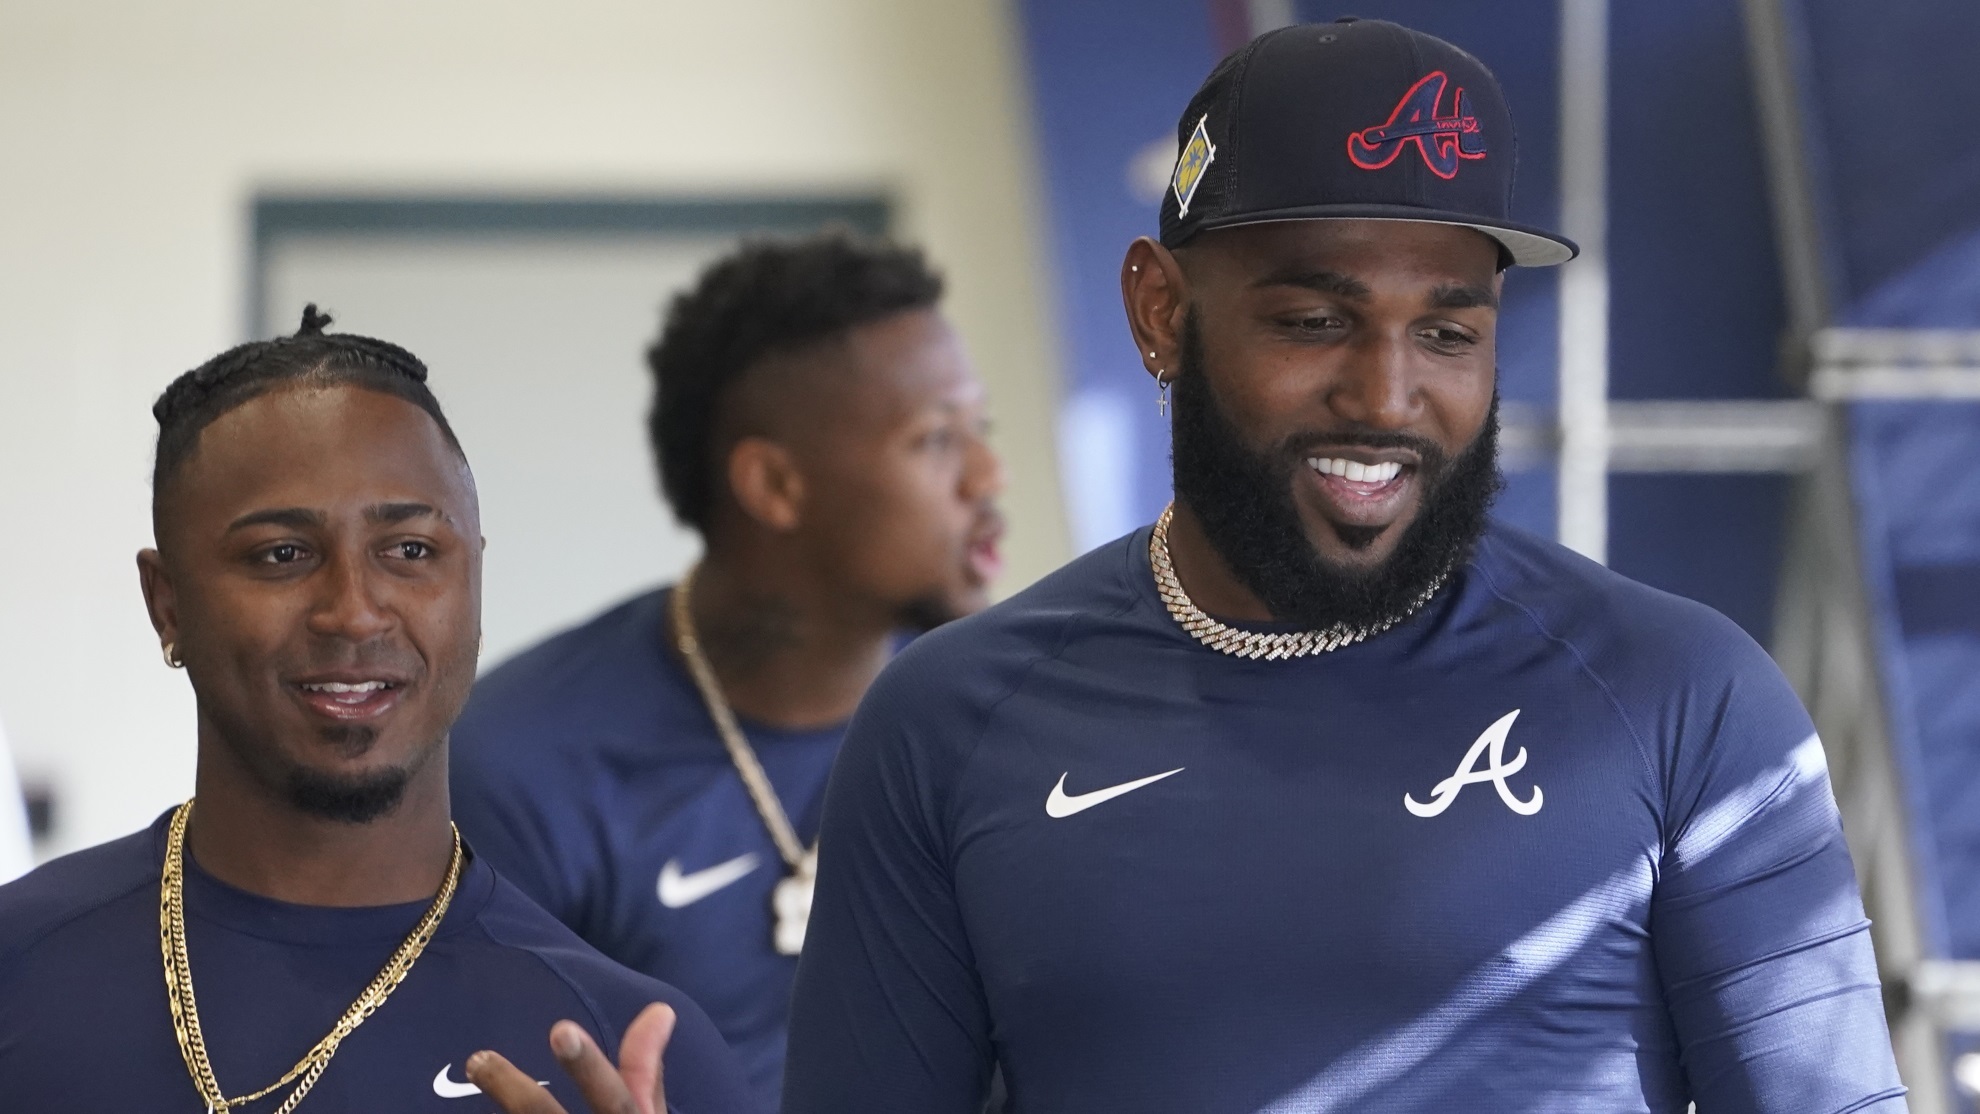 Marcell Ozuna talks to teammate Ozzie Alvies in the batting cages during spring training baseball.